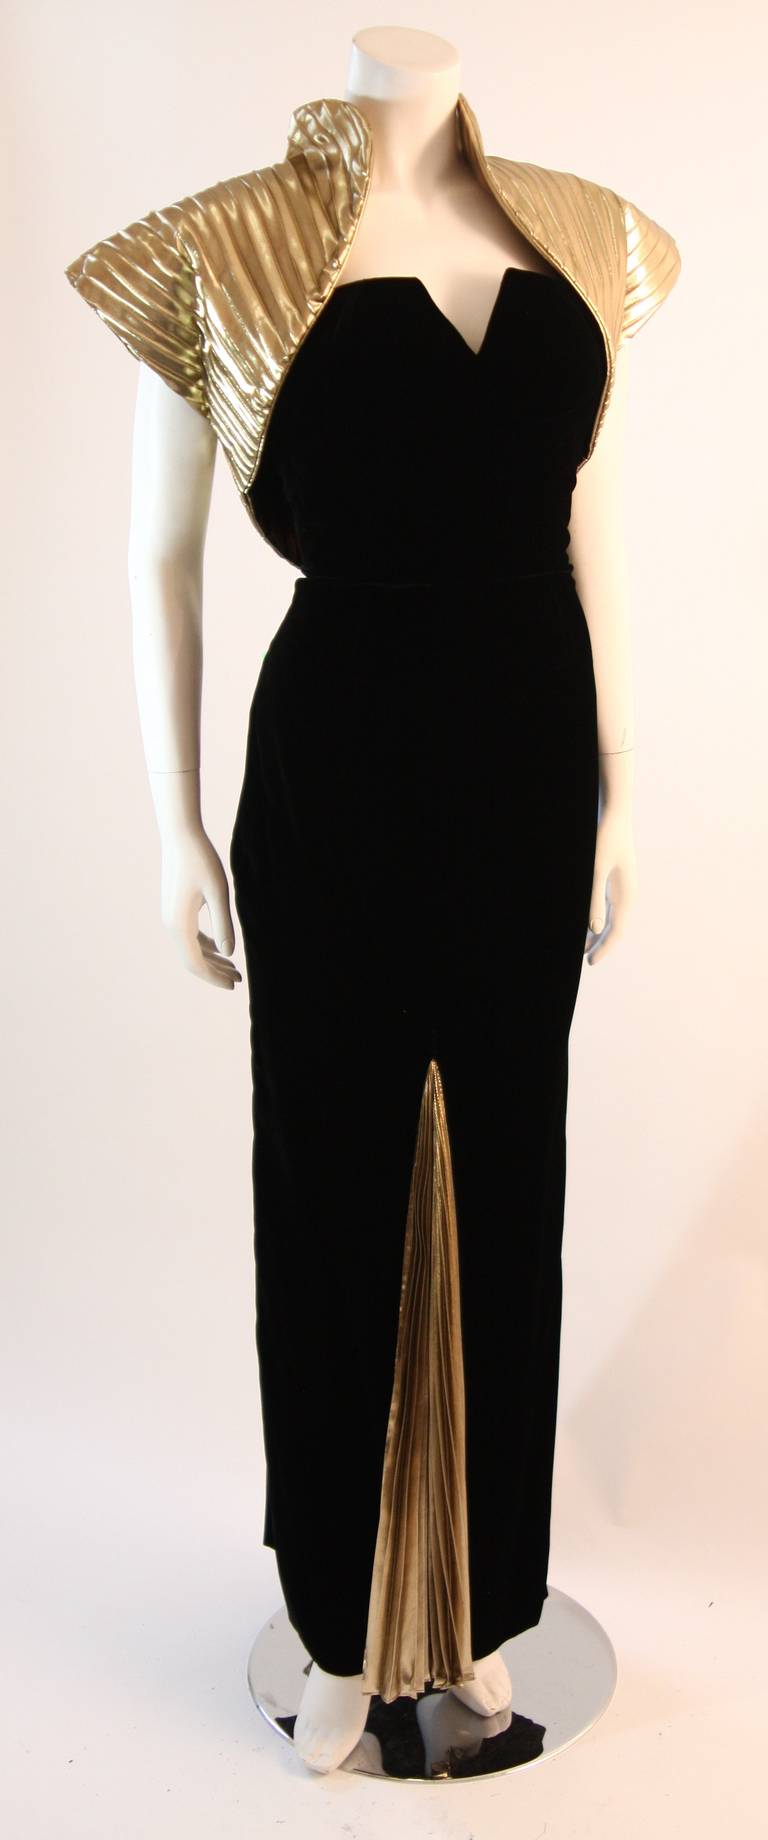 This is a stunning Vicky Tiel gown. The gown is composed of a beautiful black velvet and is accented with a wonderful metallic gold accordion material. The chic bolero adds the perfect amount of personality to the piece. Amazing design. 

Measures